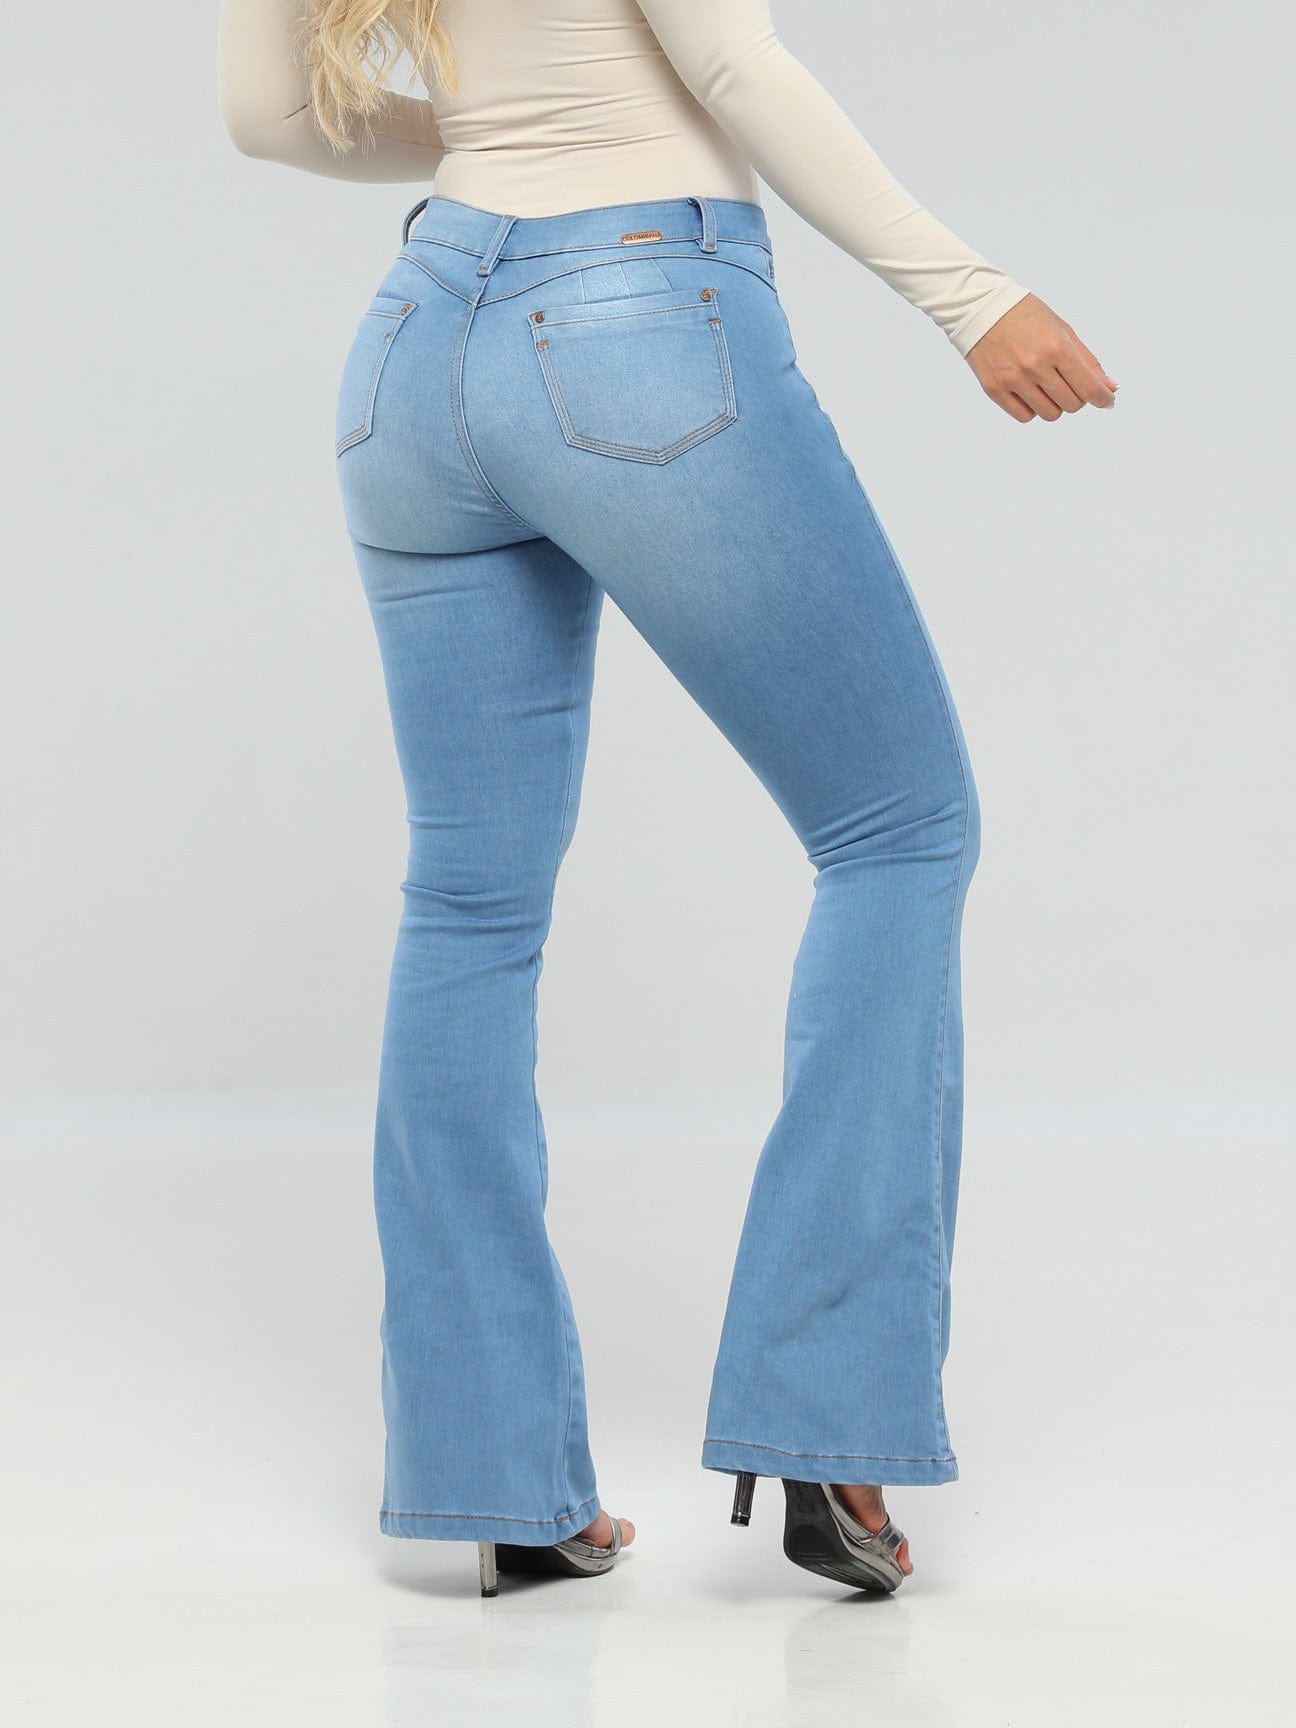 JEANS COLOMBIANOS SC8683 Authentic Colombian Push Up Jeans, Jean Levanta  Cola